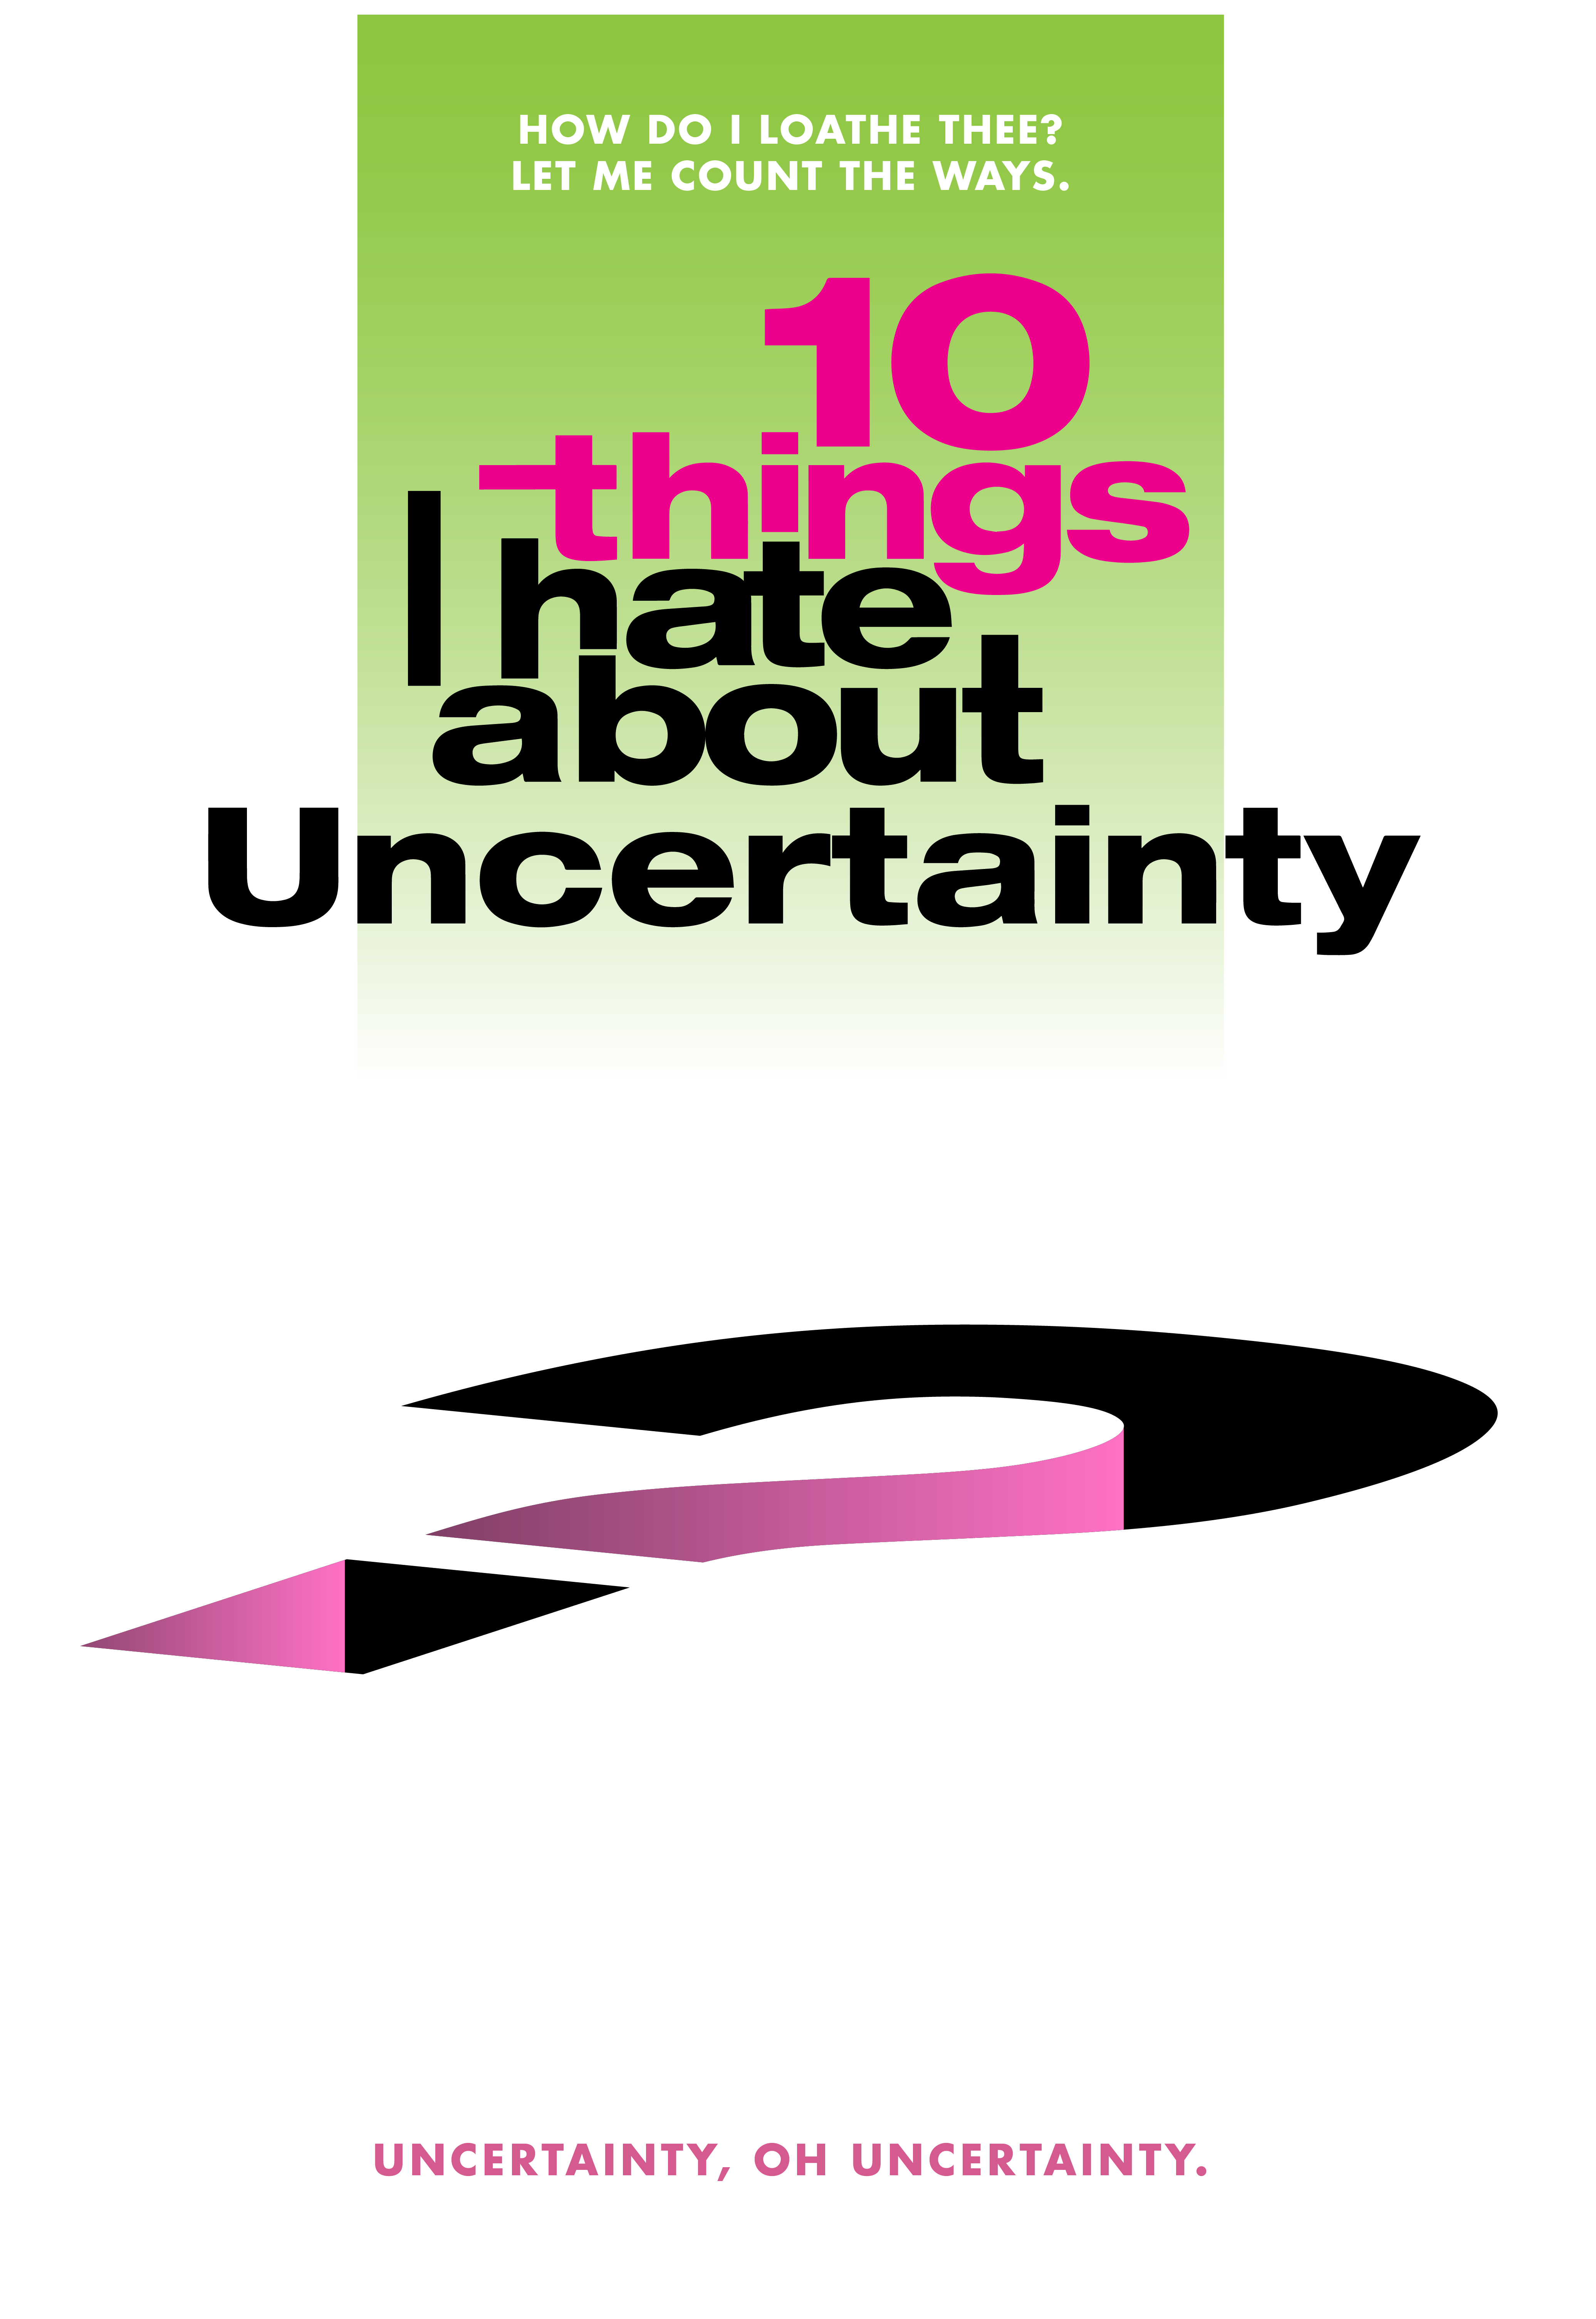 Green box. Text: How do I loathe thee? Let me count they ways. Then text: 10 things I hate about uncertainty. Bit question mark. Text: Uncertainty. Oh uncertainty.